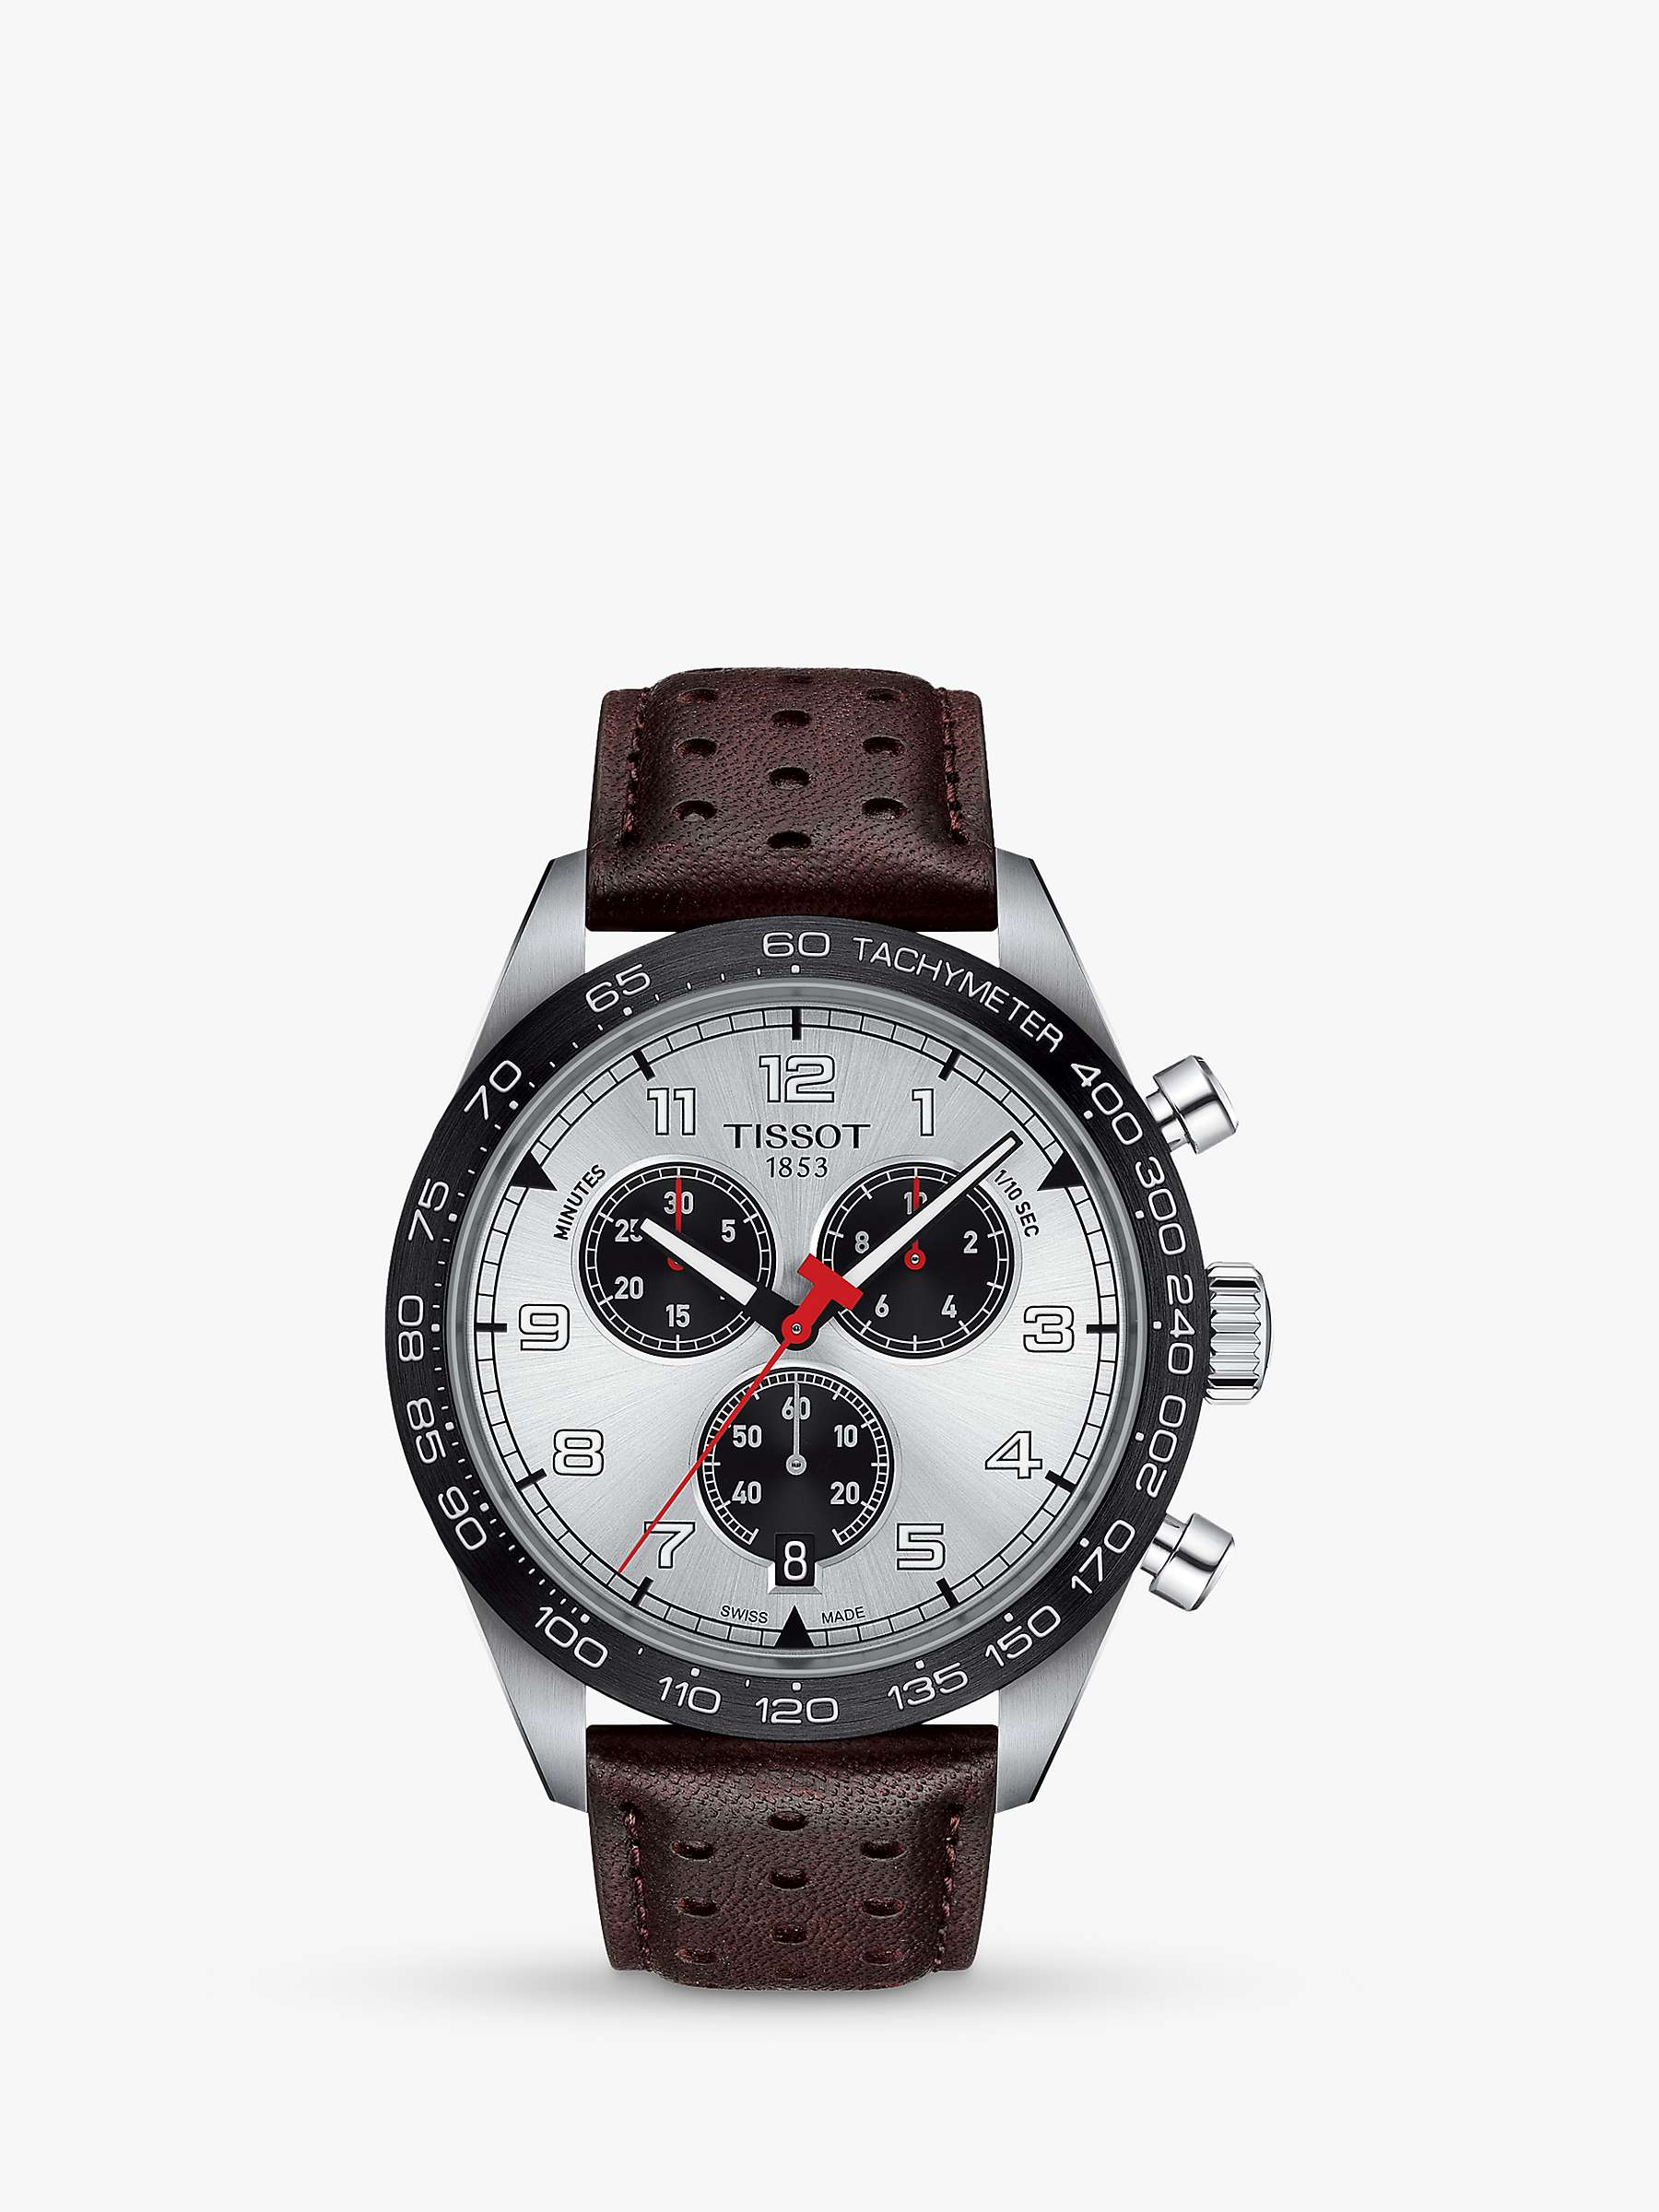 Buy Tissot T1316171603200 Men's Chronograph Leather Strap Watch, Brown/Silver Online at johnlewis.com